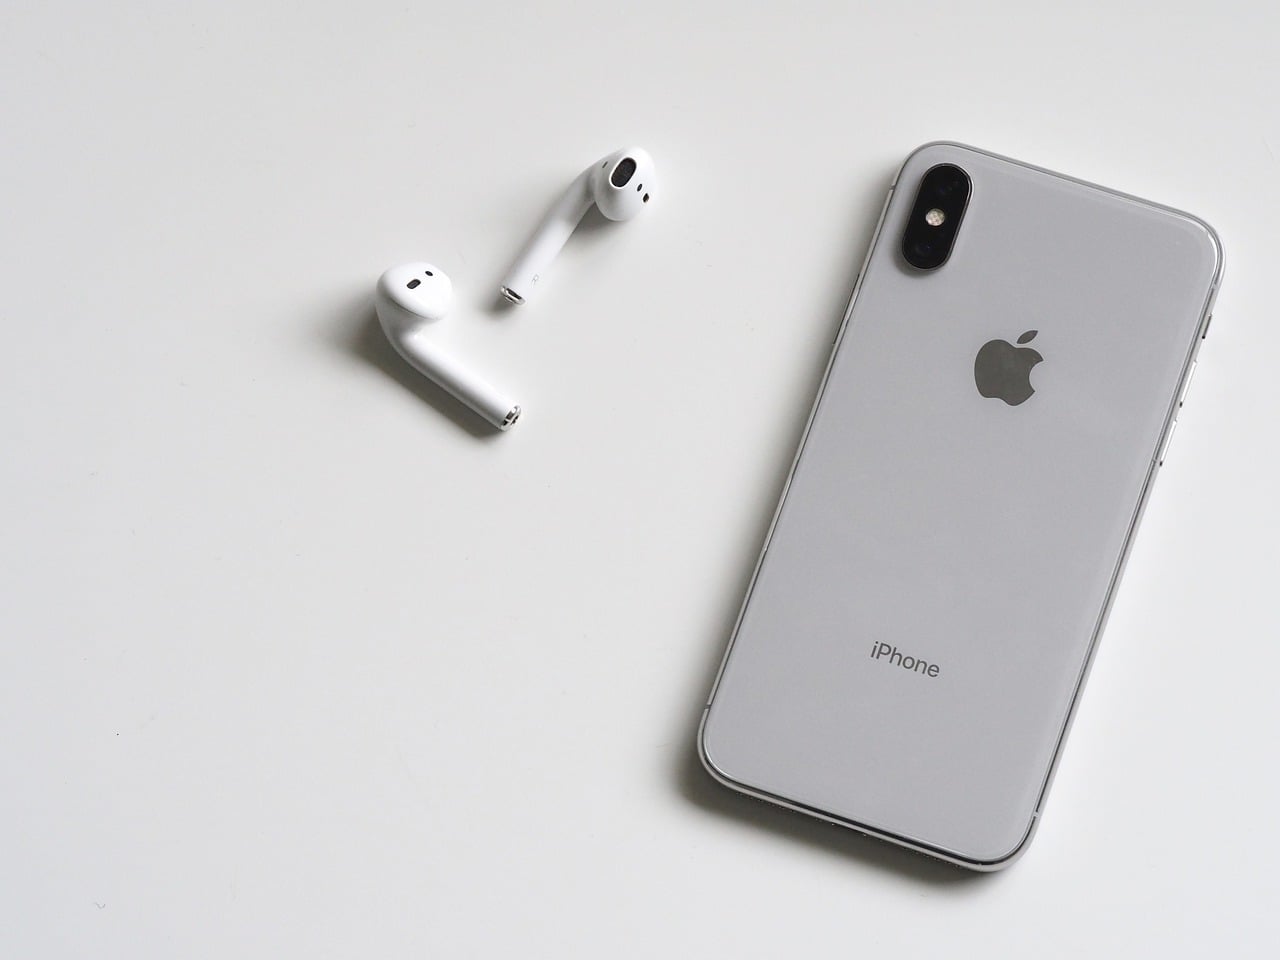 Engrave emoji on AirPods case